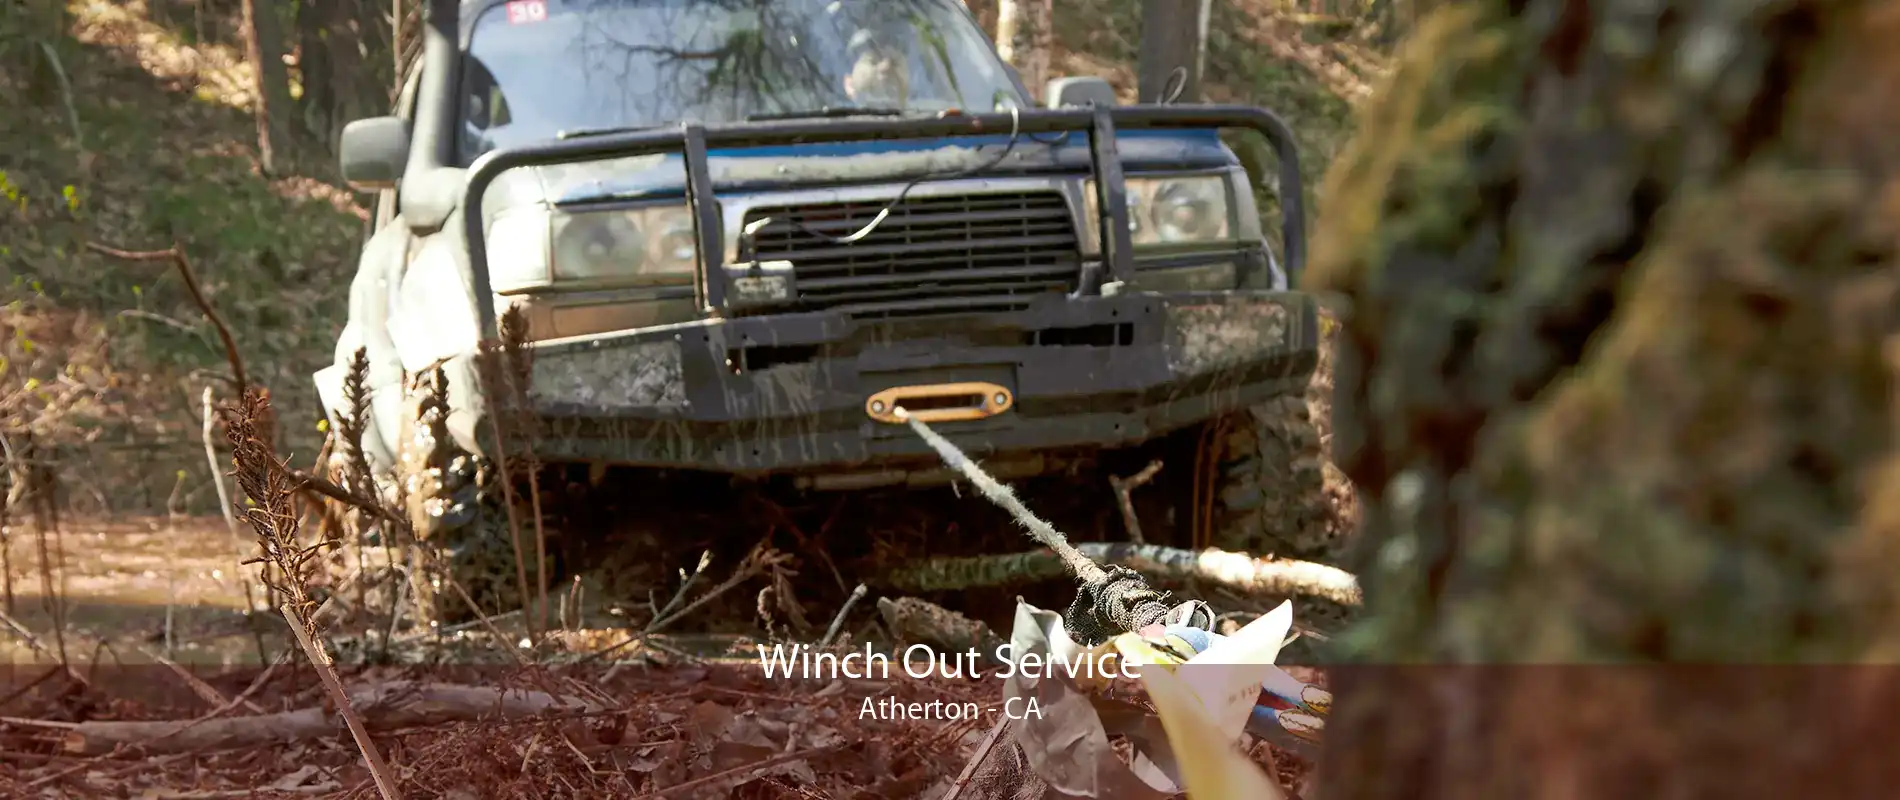 Winch Out Service Atherton - CA